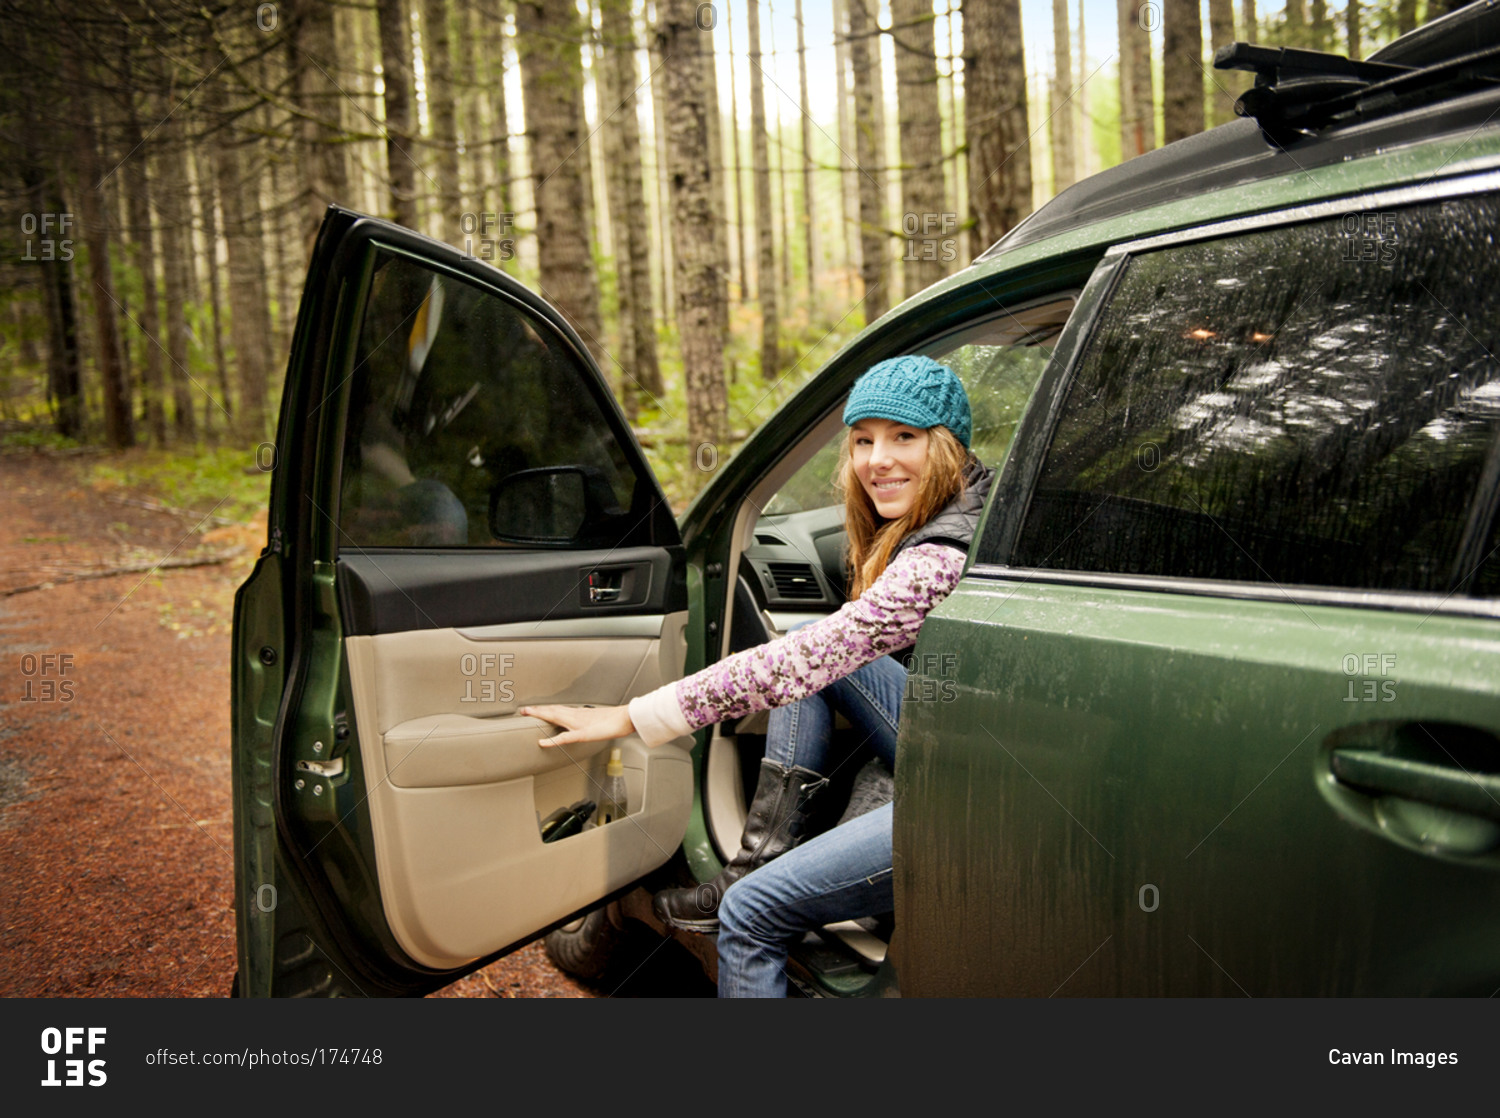 A woman getting out of her car in the woods